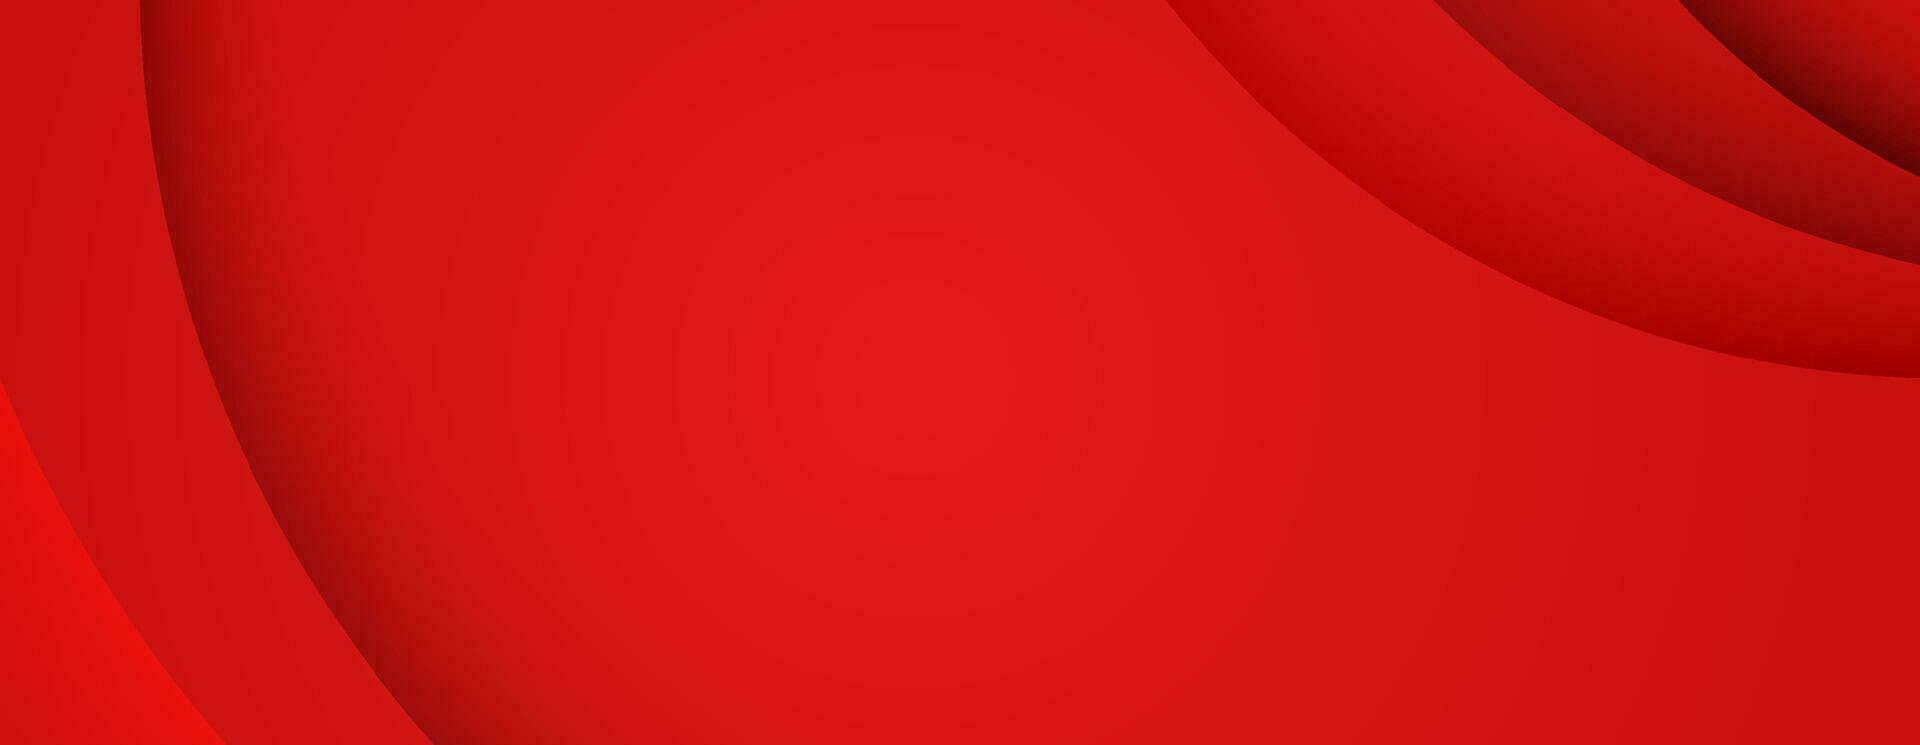 Christmas abstract background with red curve paper layer. Illustration horizontal template background banner. vector